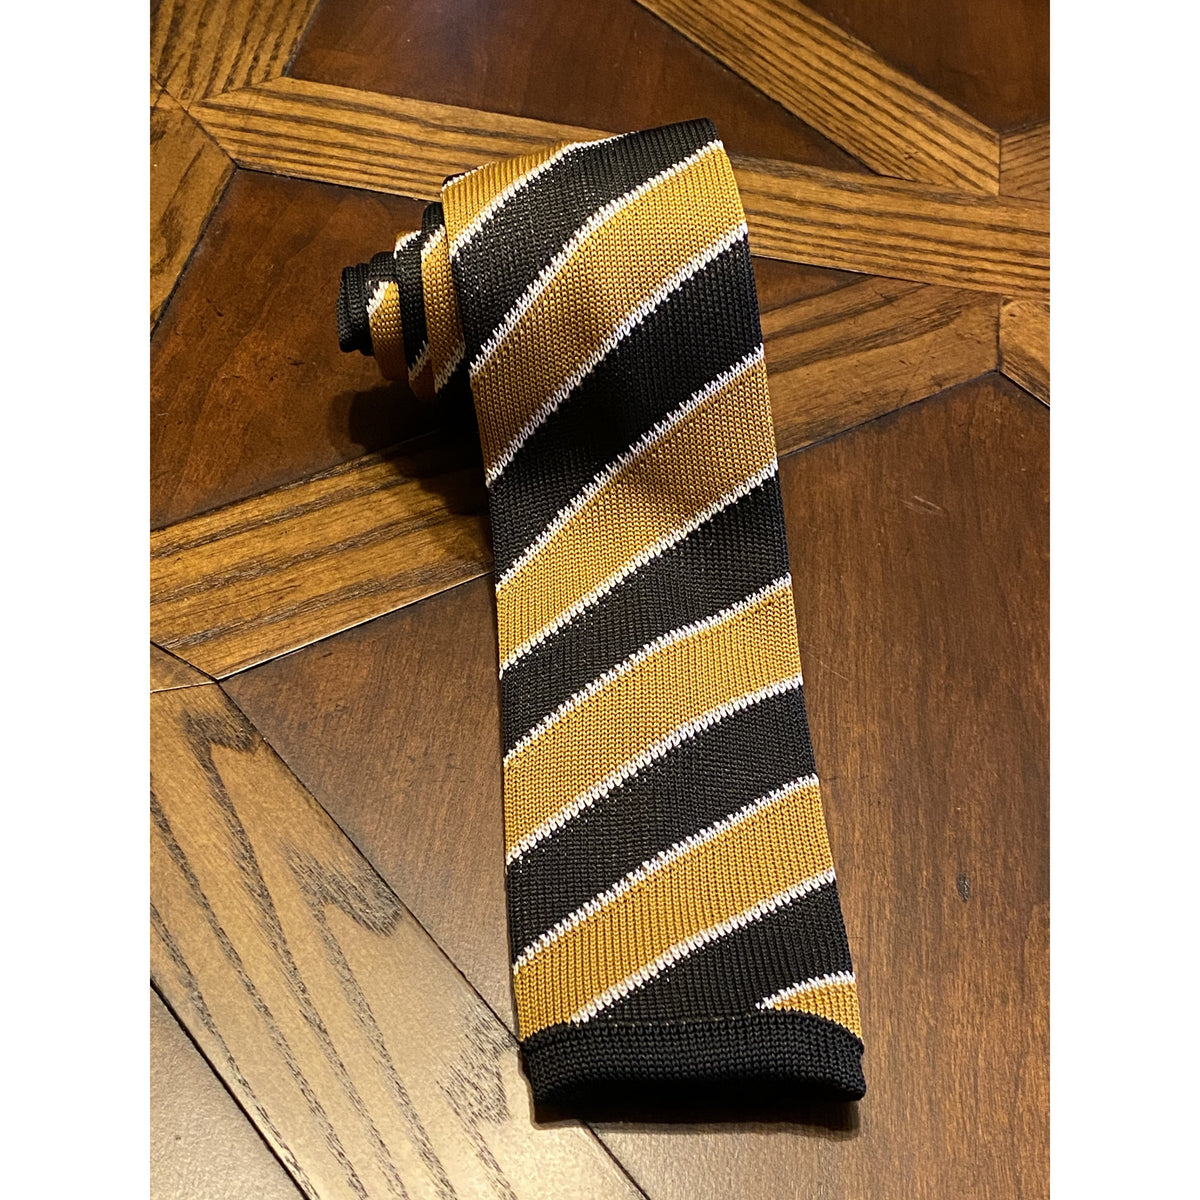 Black and Old Gold (Alpha Inspired) Knit Tie – The King McNeal Collection